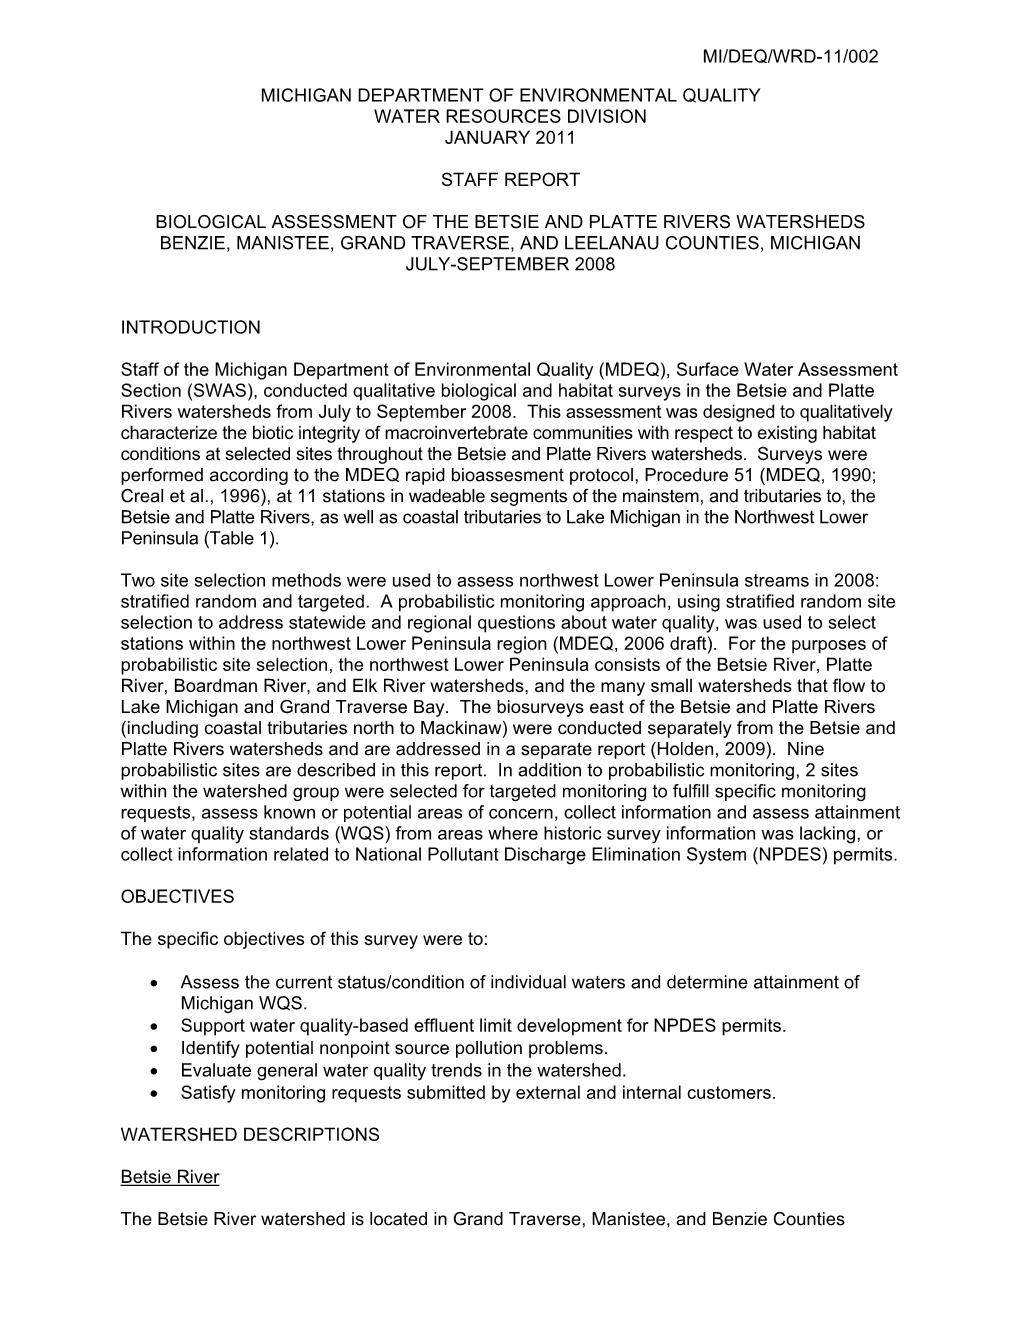 Michigan Department of Environmental Quality Water Resources Division January 2011 Staff Report Biological Assessment of The